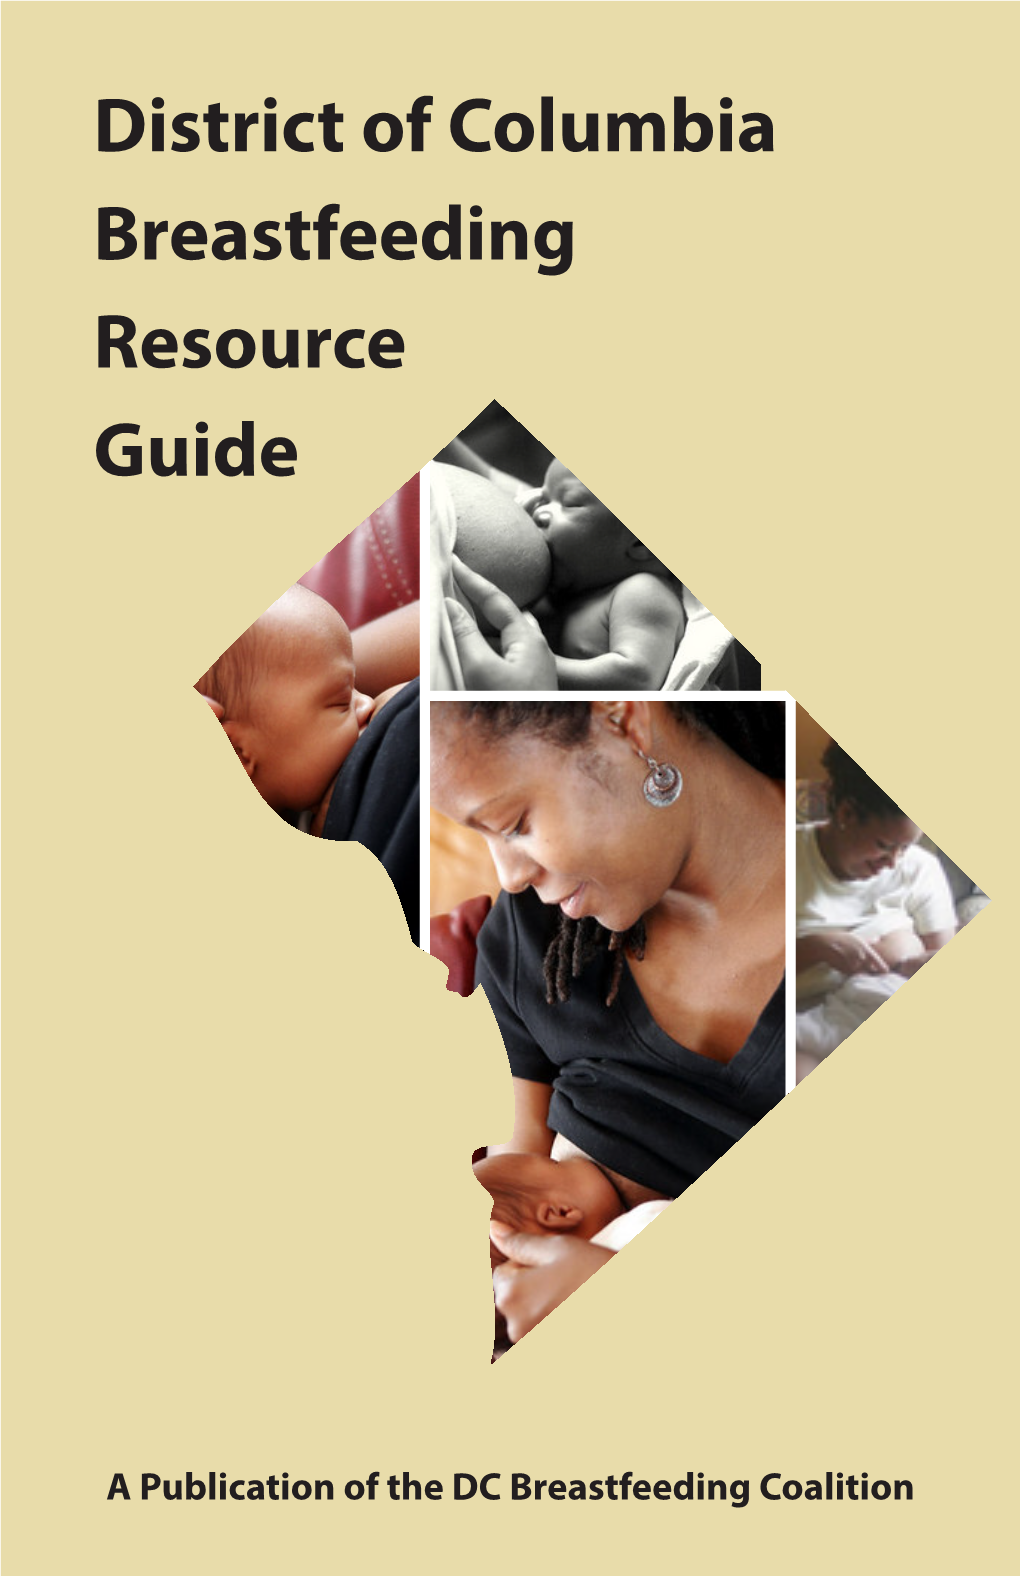 District of Columbia Breastfeeding Resource Guide